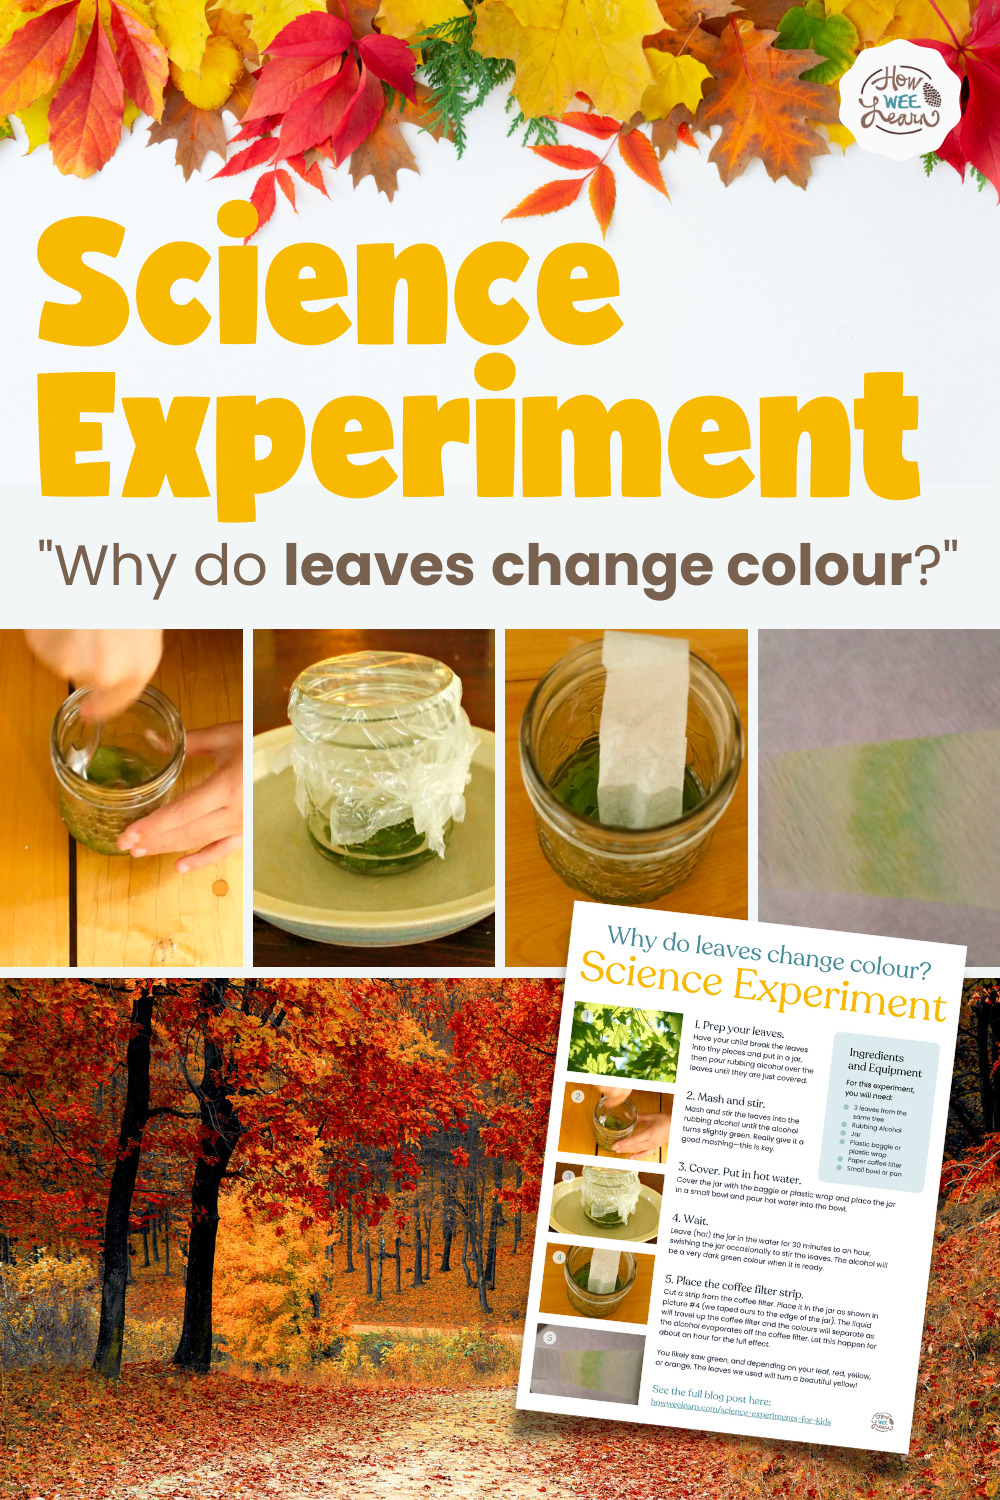 Science Experiment: Why do leaves change colour?